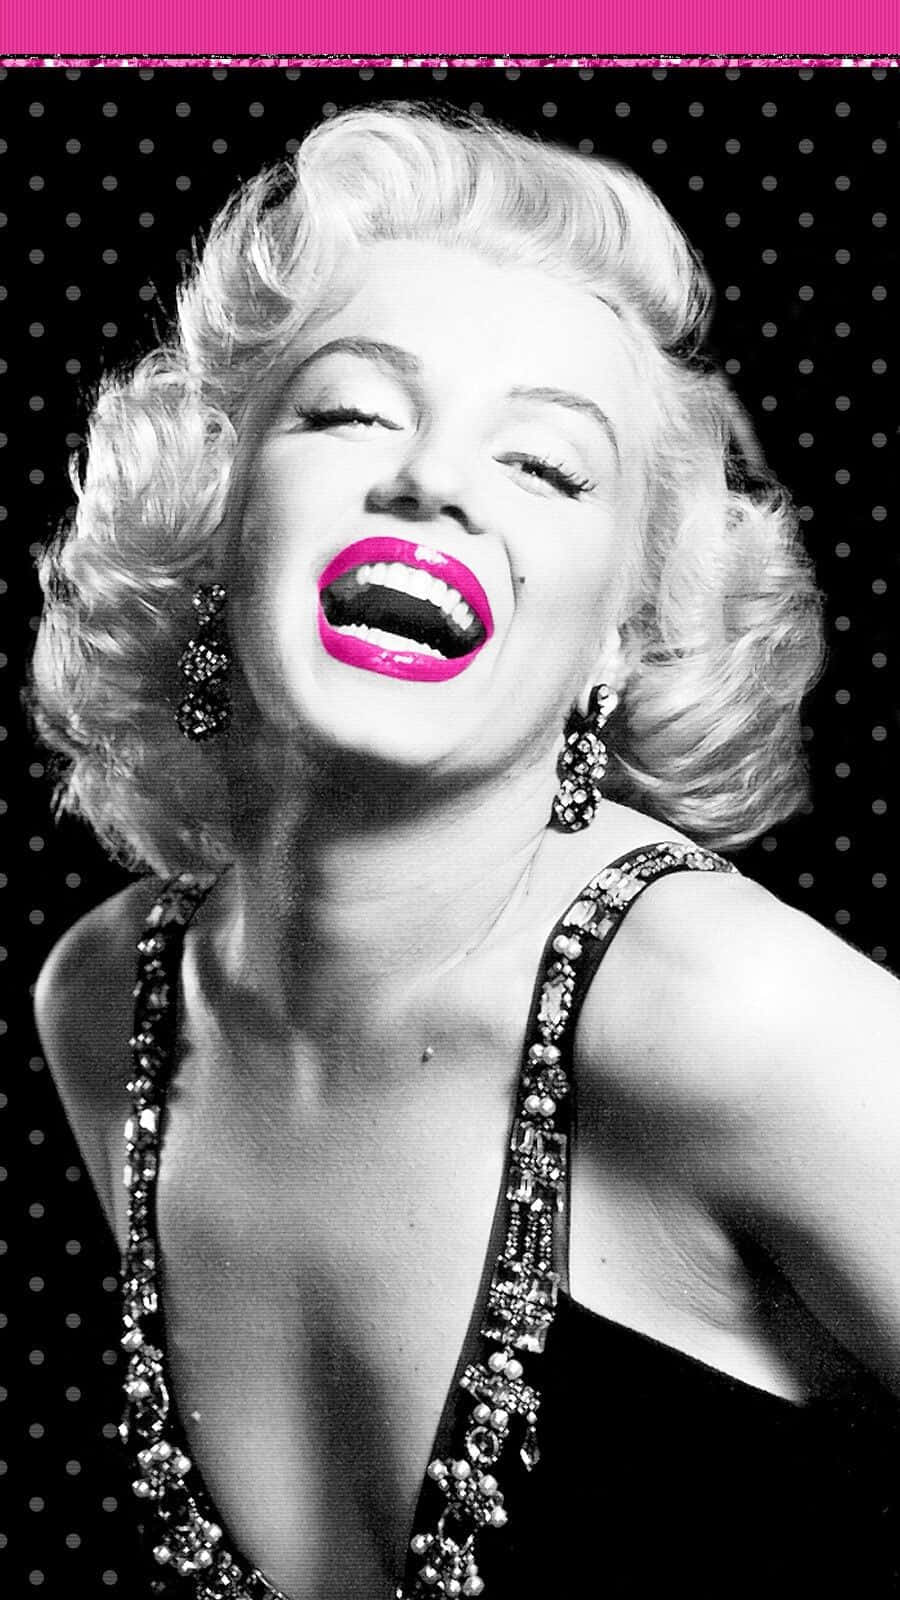 Hollywood Icon Marilyn Monroe's Eyes Adorn this Iphone Wallpaper